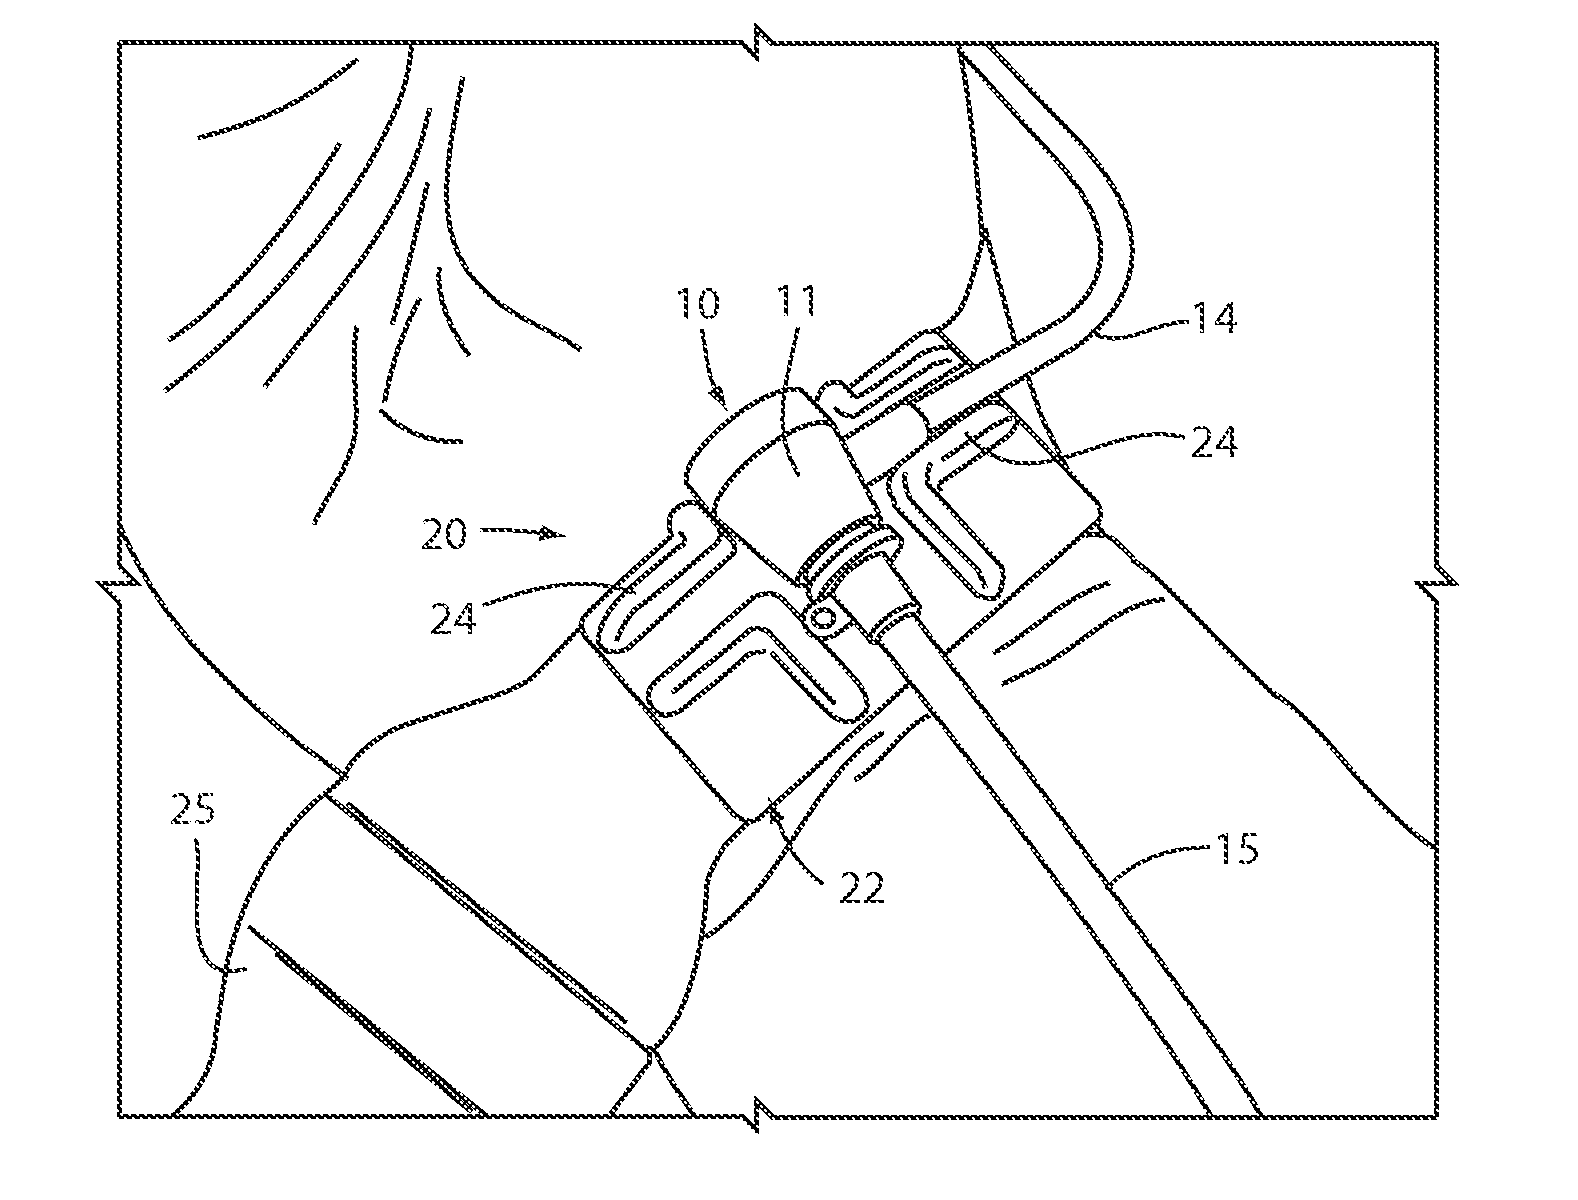 Method and device for interventional site management of sheaths and catheters